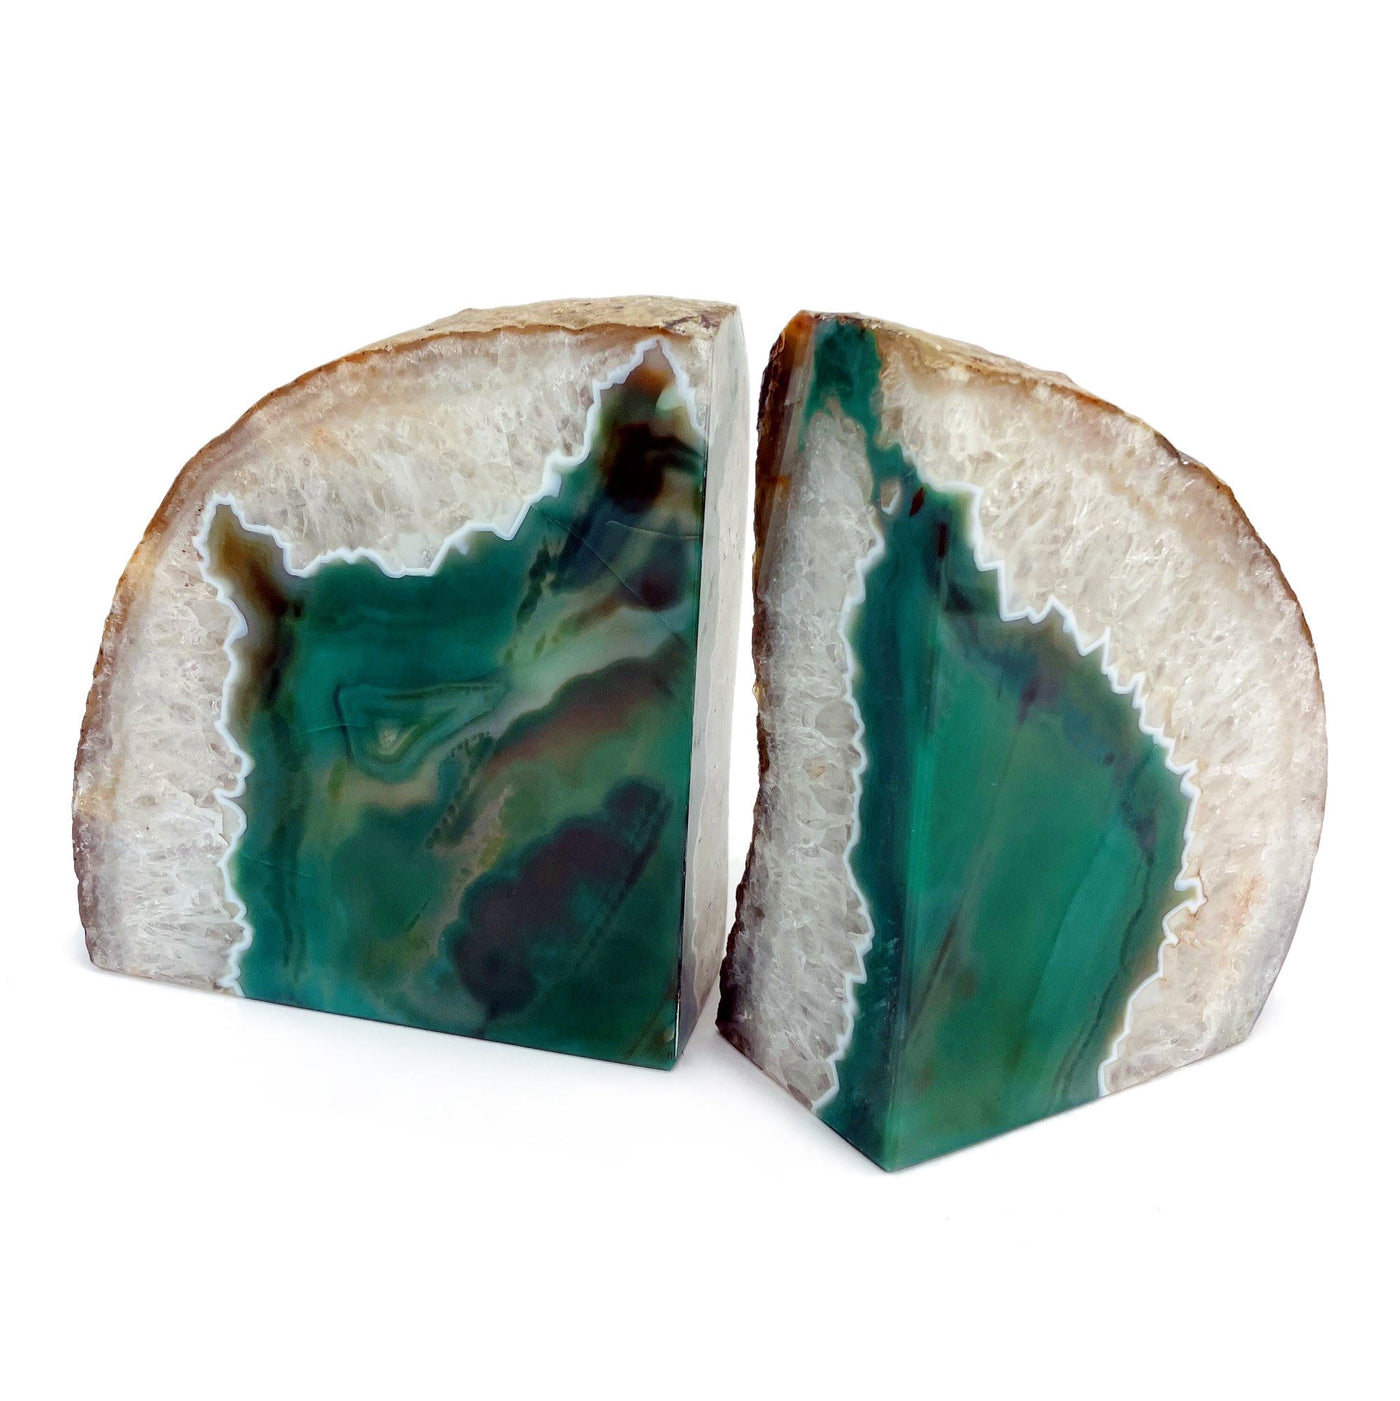 Green Agate Bookend front facing and angled to show the pattern.